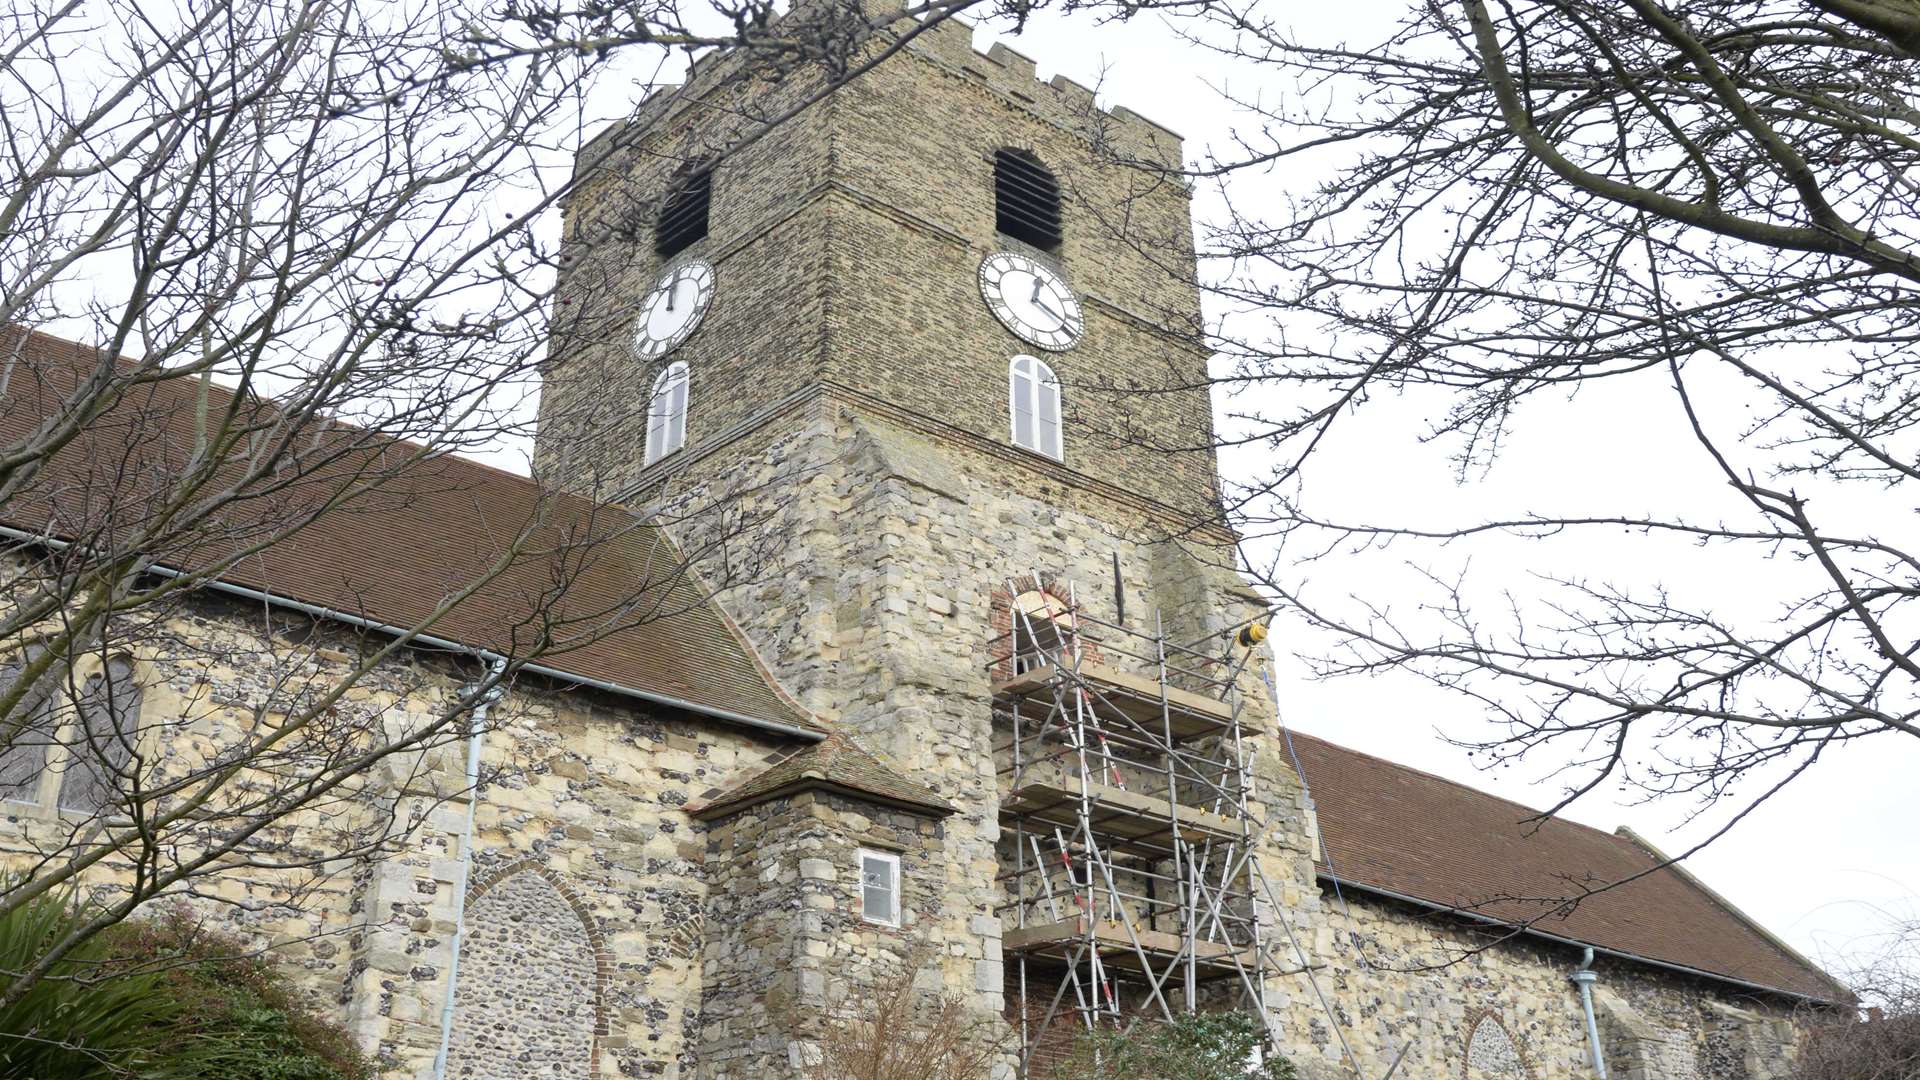 The tower tours in St Peter's Church need a name